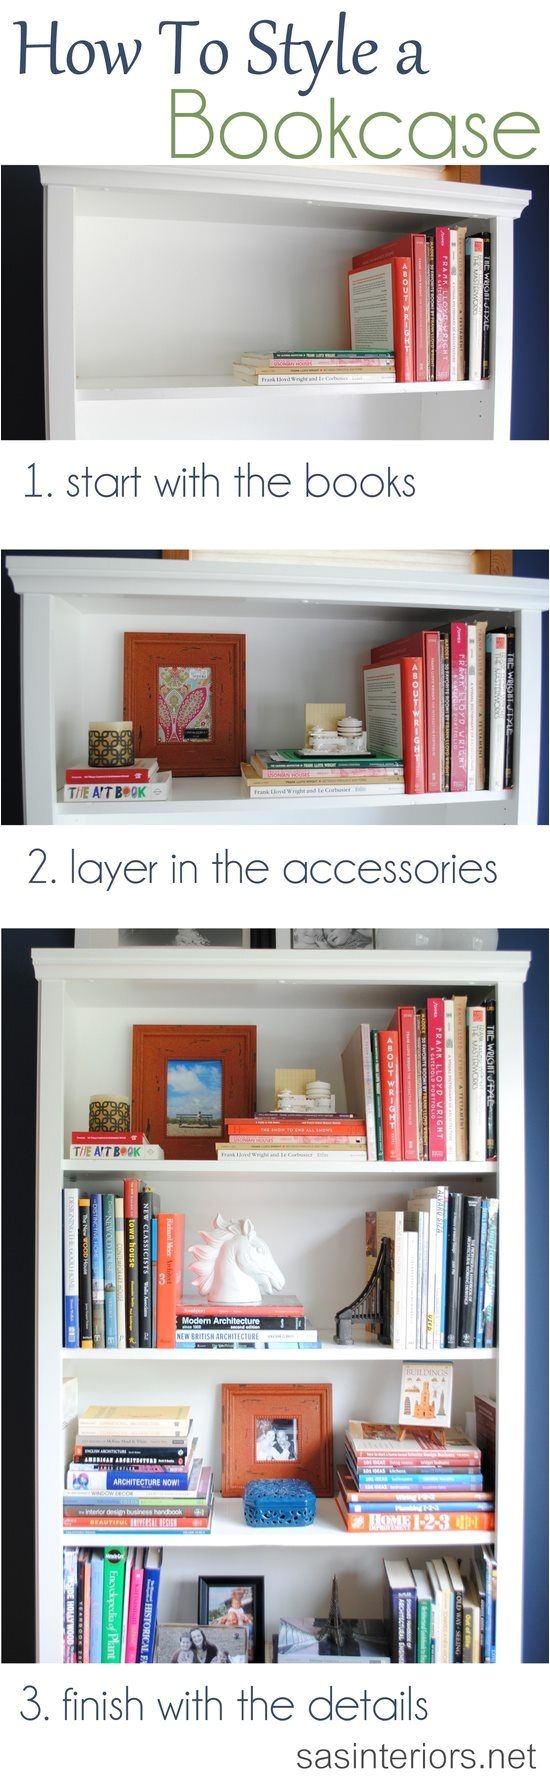 inspiration tips and ideas on how and where to begin accessorizing a bookcase or shelf in your home by jenna burger i wish my bookshelves were